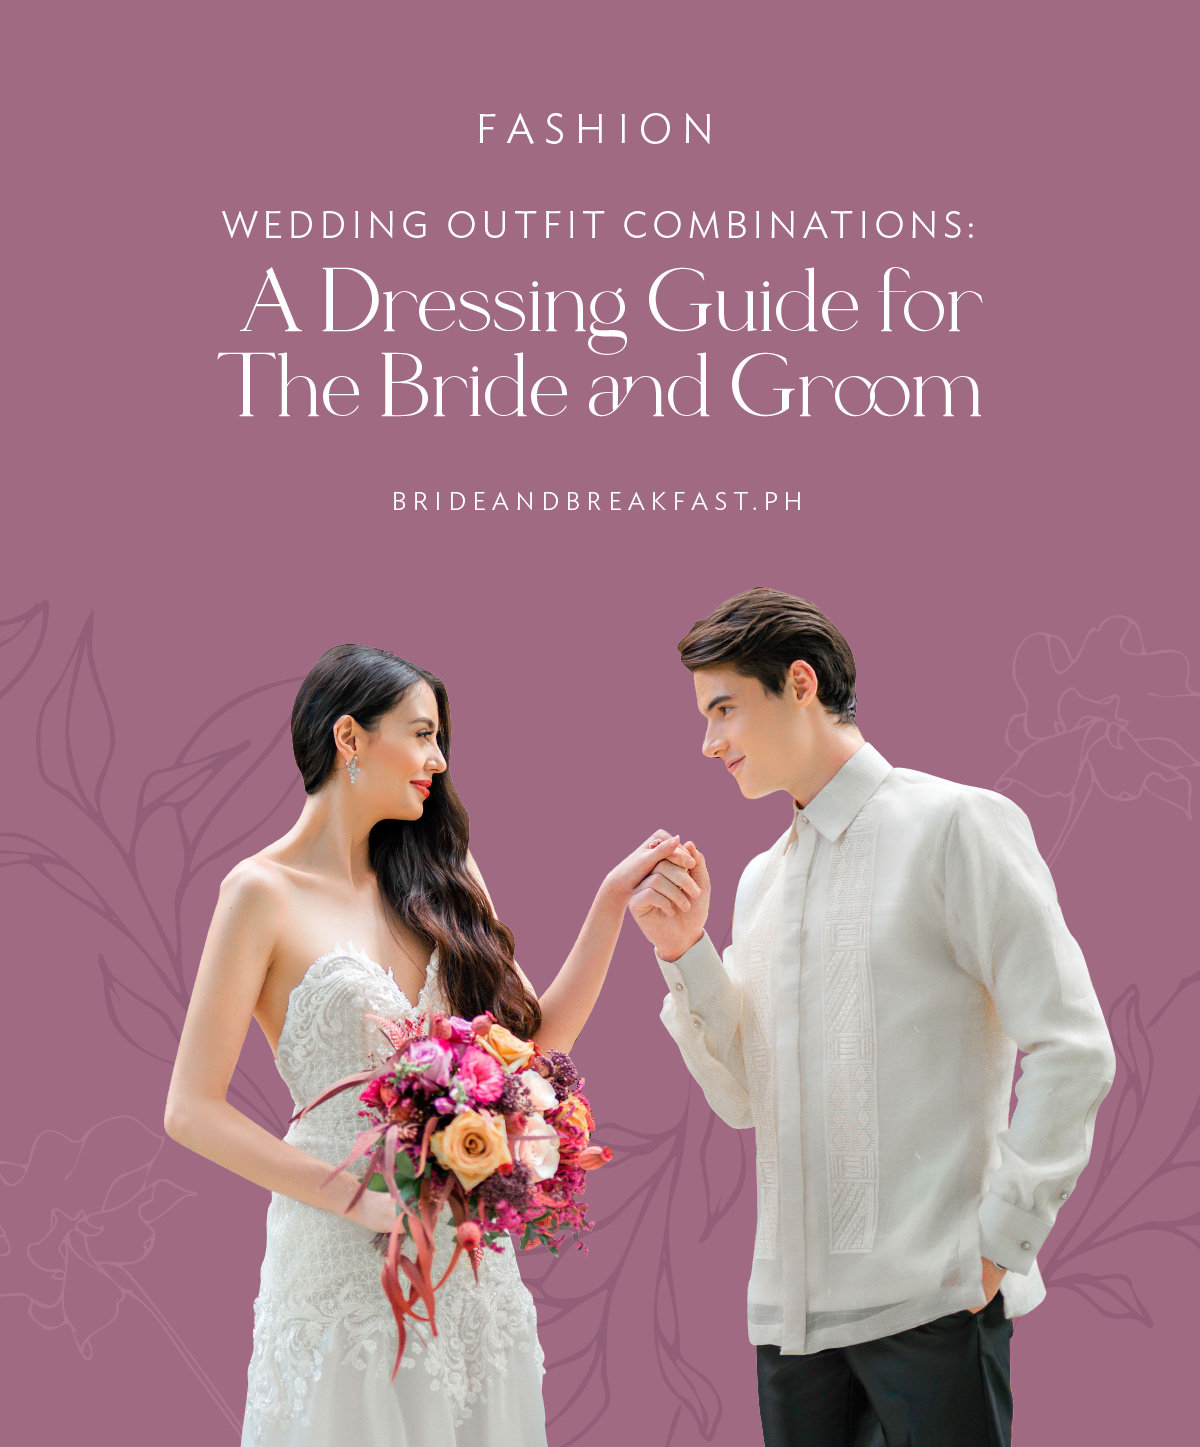 Wedding Outfit Combinations: A Dressing Guide for The Bride and Groom